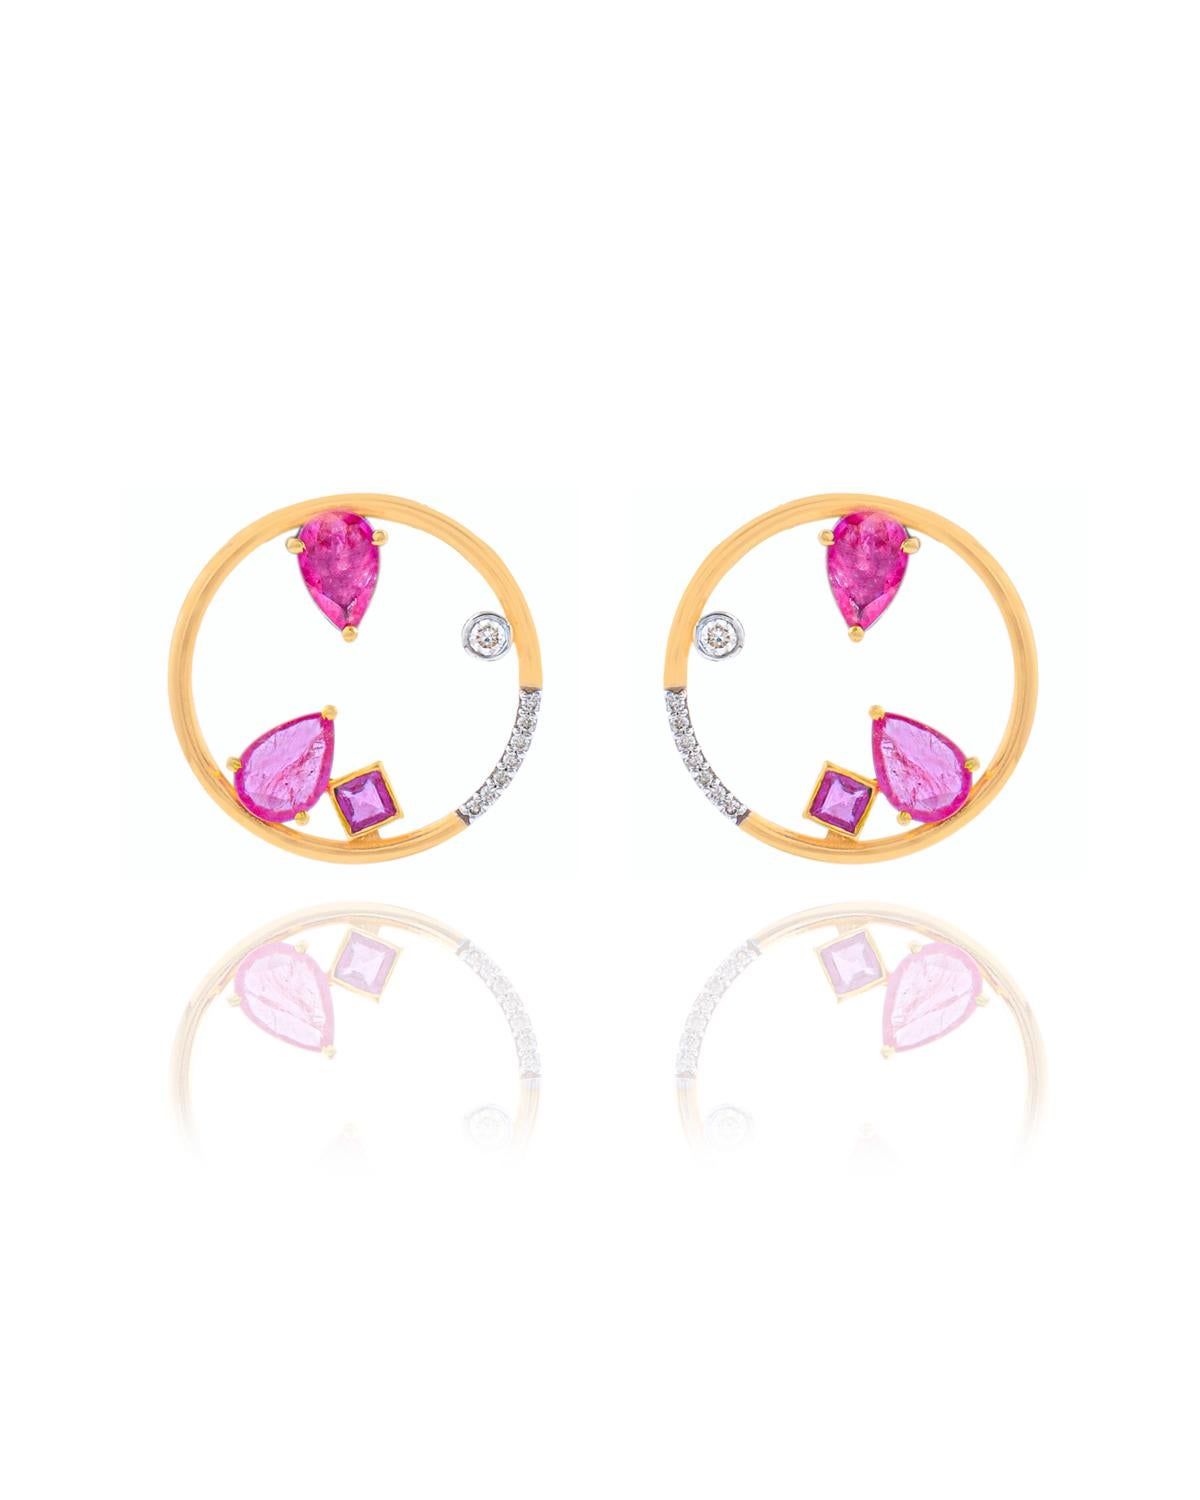 These earrings are made with Ruby gemstones and diamond. They are set in 14K gold. Shine all day long in this delicate pair of stud earrings. Perfect for gifting, they twinkle with timeless elegance. Easy to mix and match with other jewellery